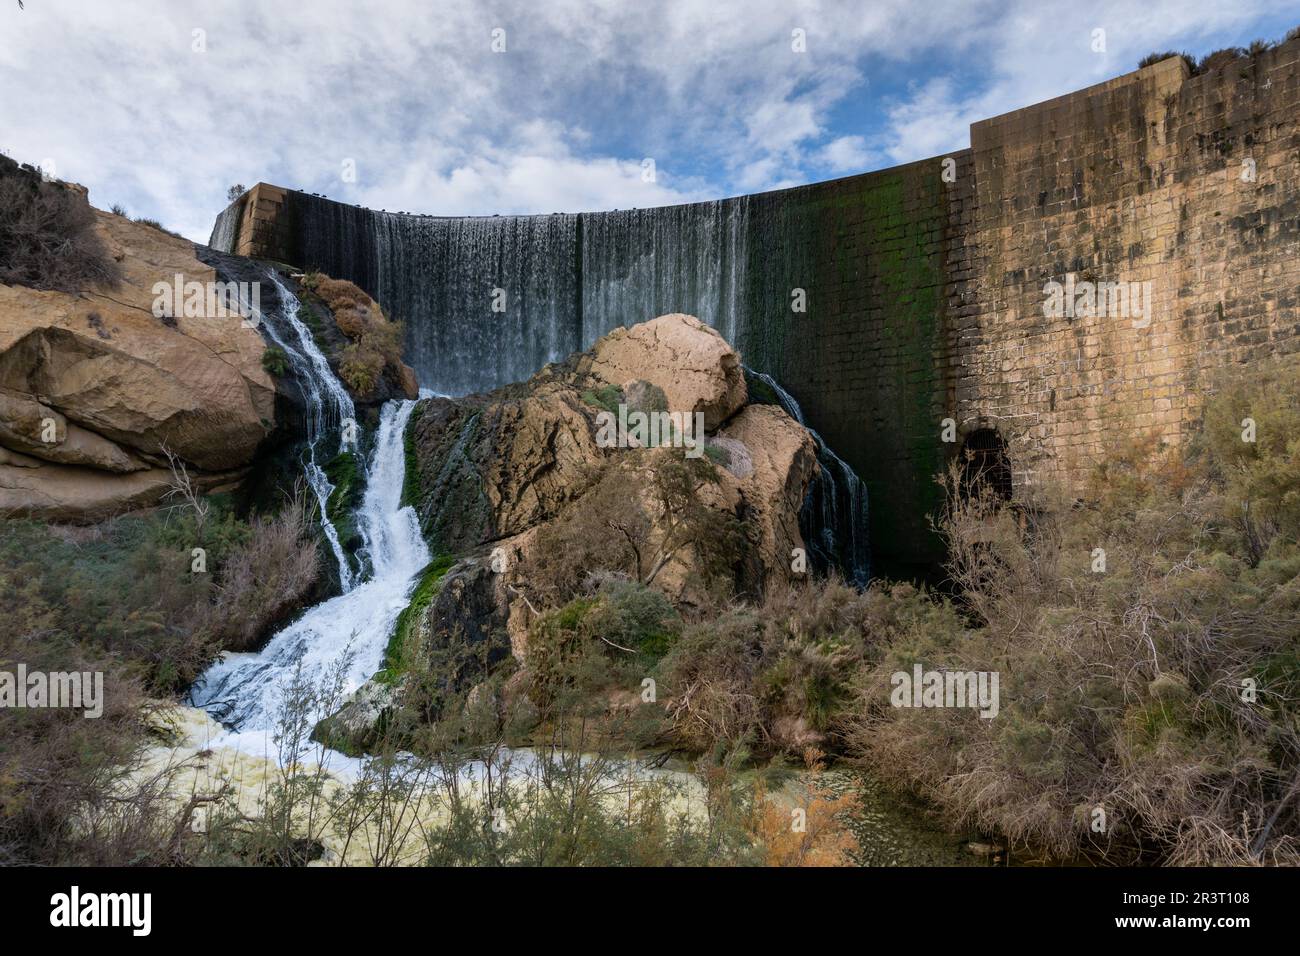 View of the waterfall and overflow of the dam wall of the Elche Reservoir Stock Photo